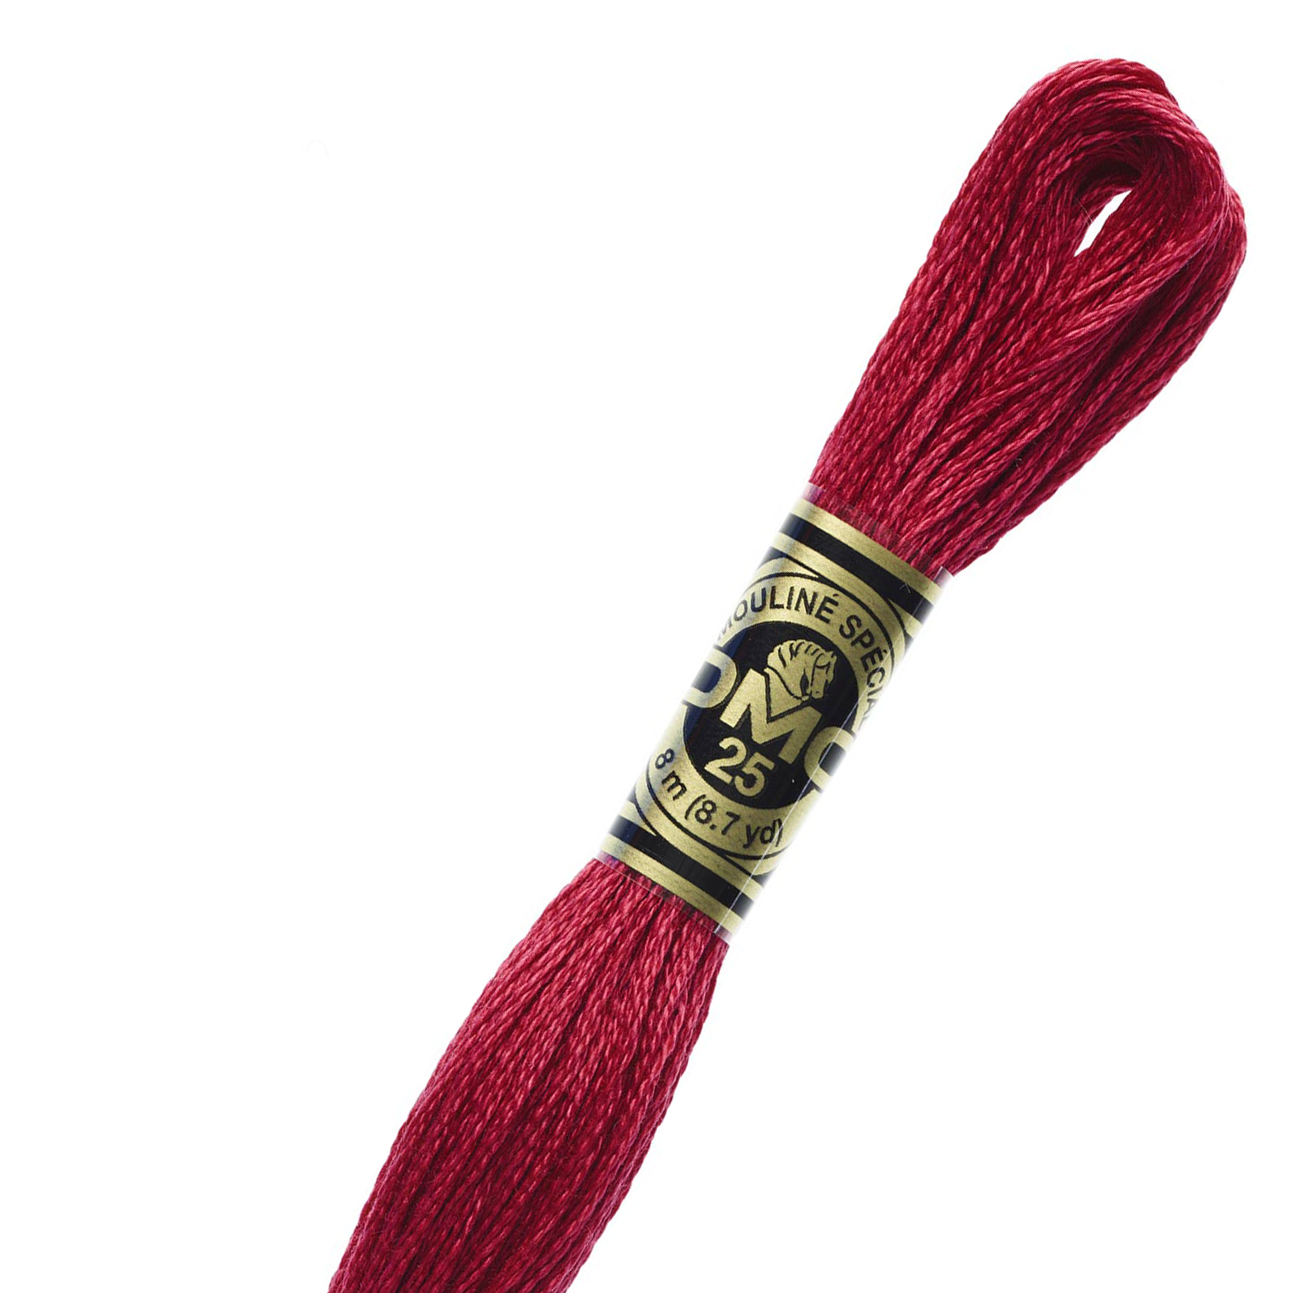 DMC C321 Mouliné Étoile Shimmer Embroidery Floss - Red - Stitched